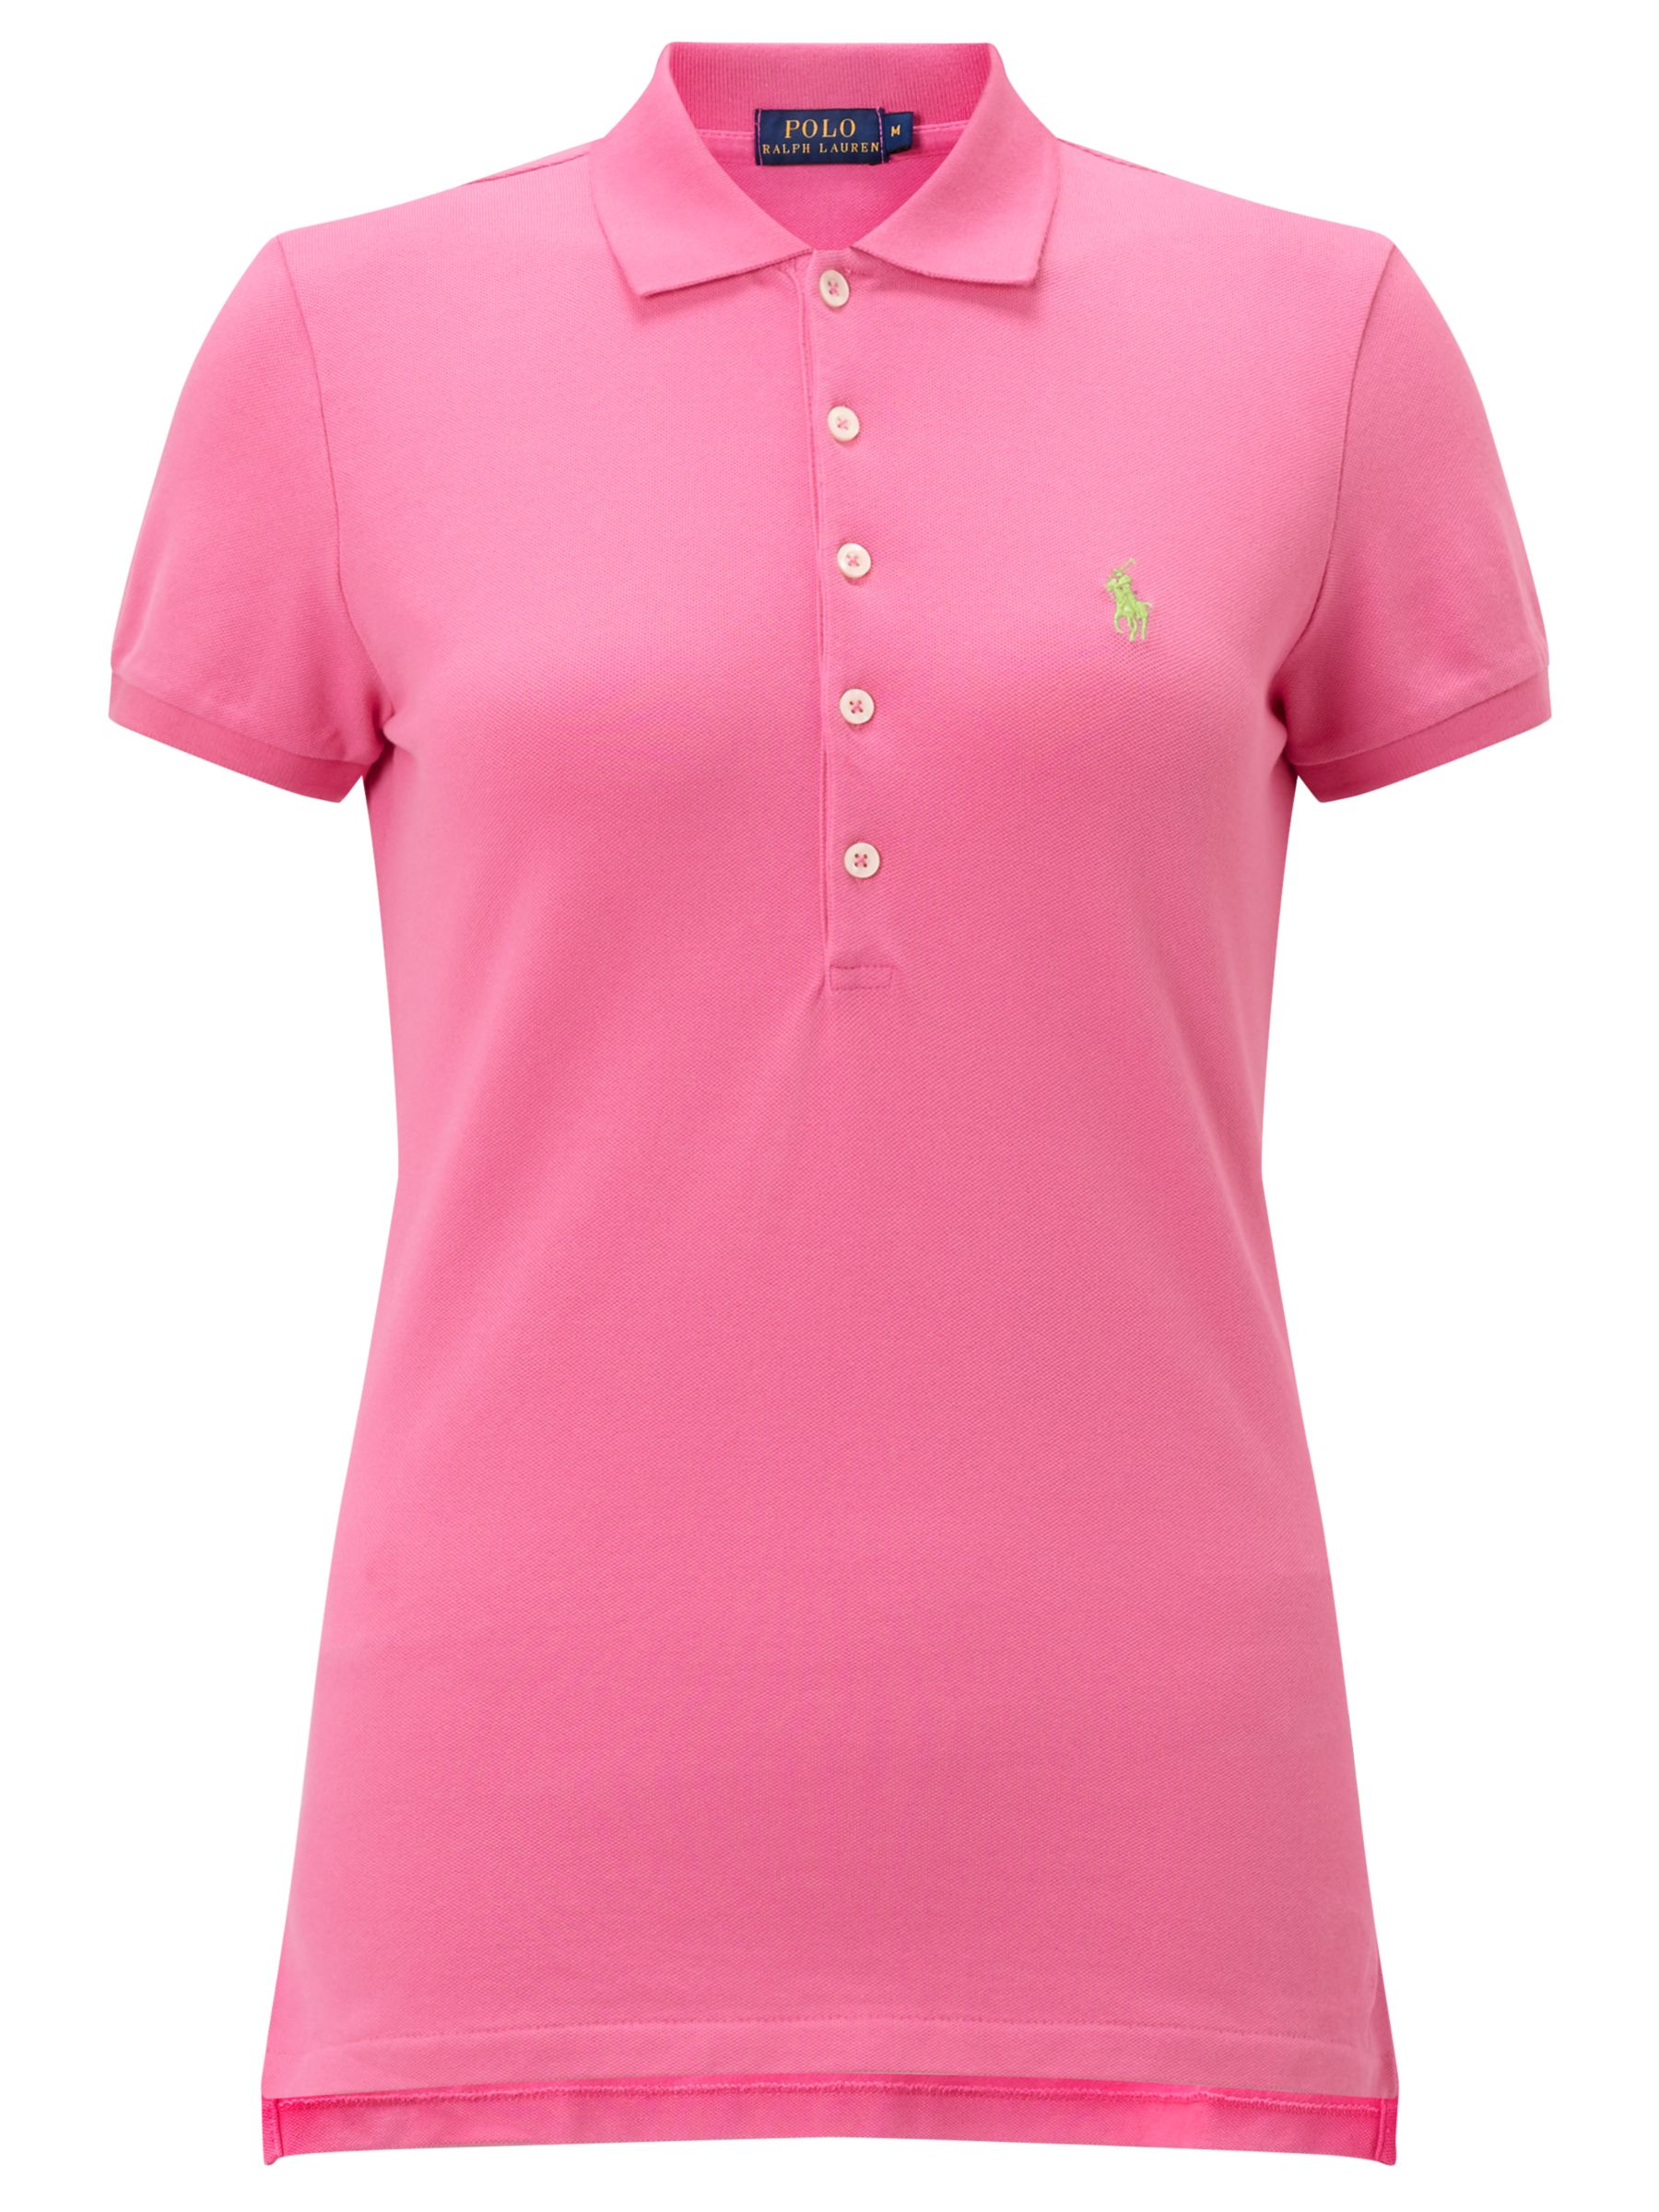 Polo Ralph Lauren Julie Skinny Fit Stretch Polo Shirt, Baja Pink at ...